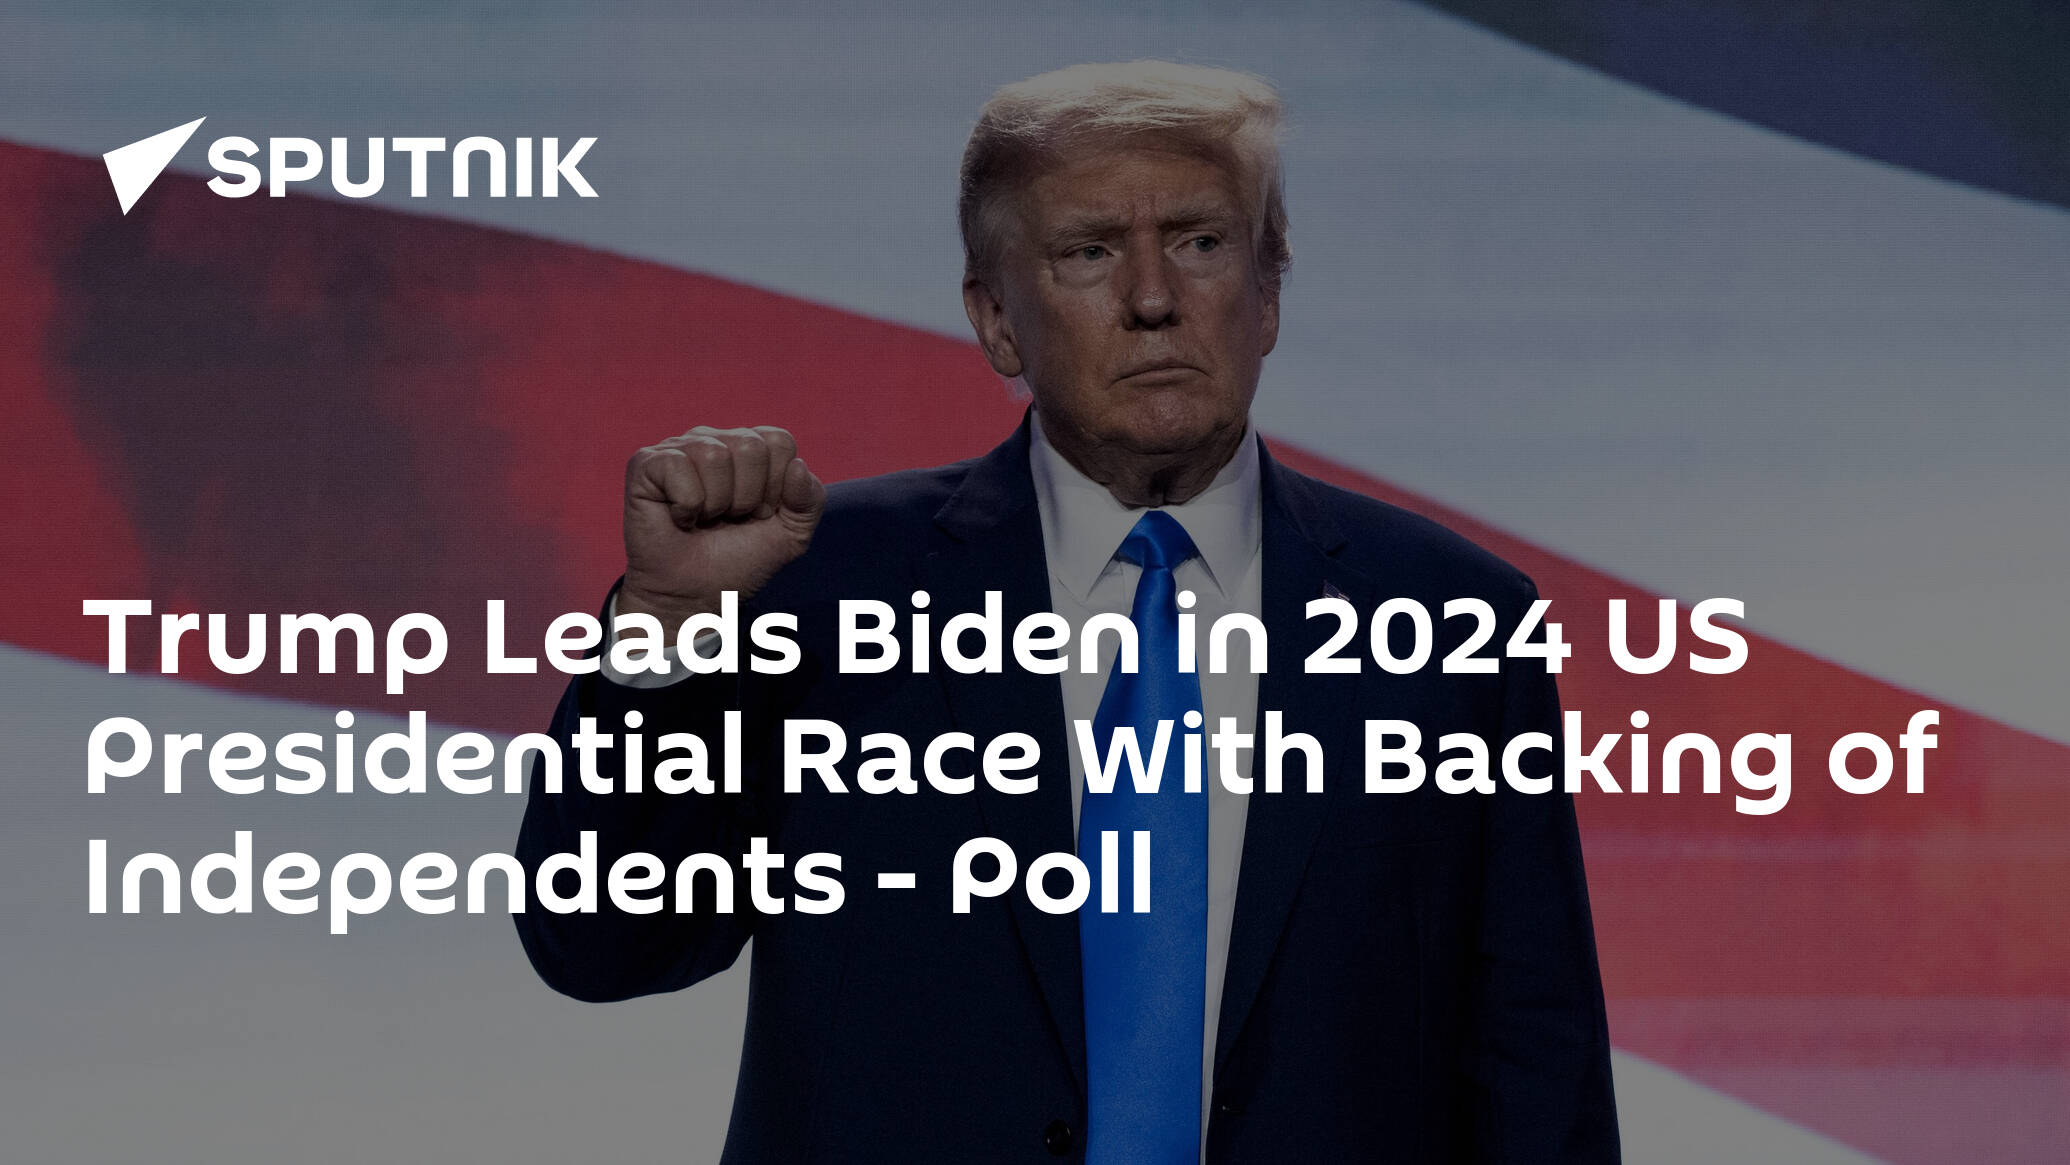 Trump Leads Biden in 2024 US Presidential Race With Backing of Independents – Poll